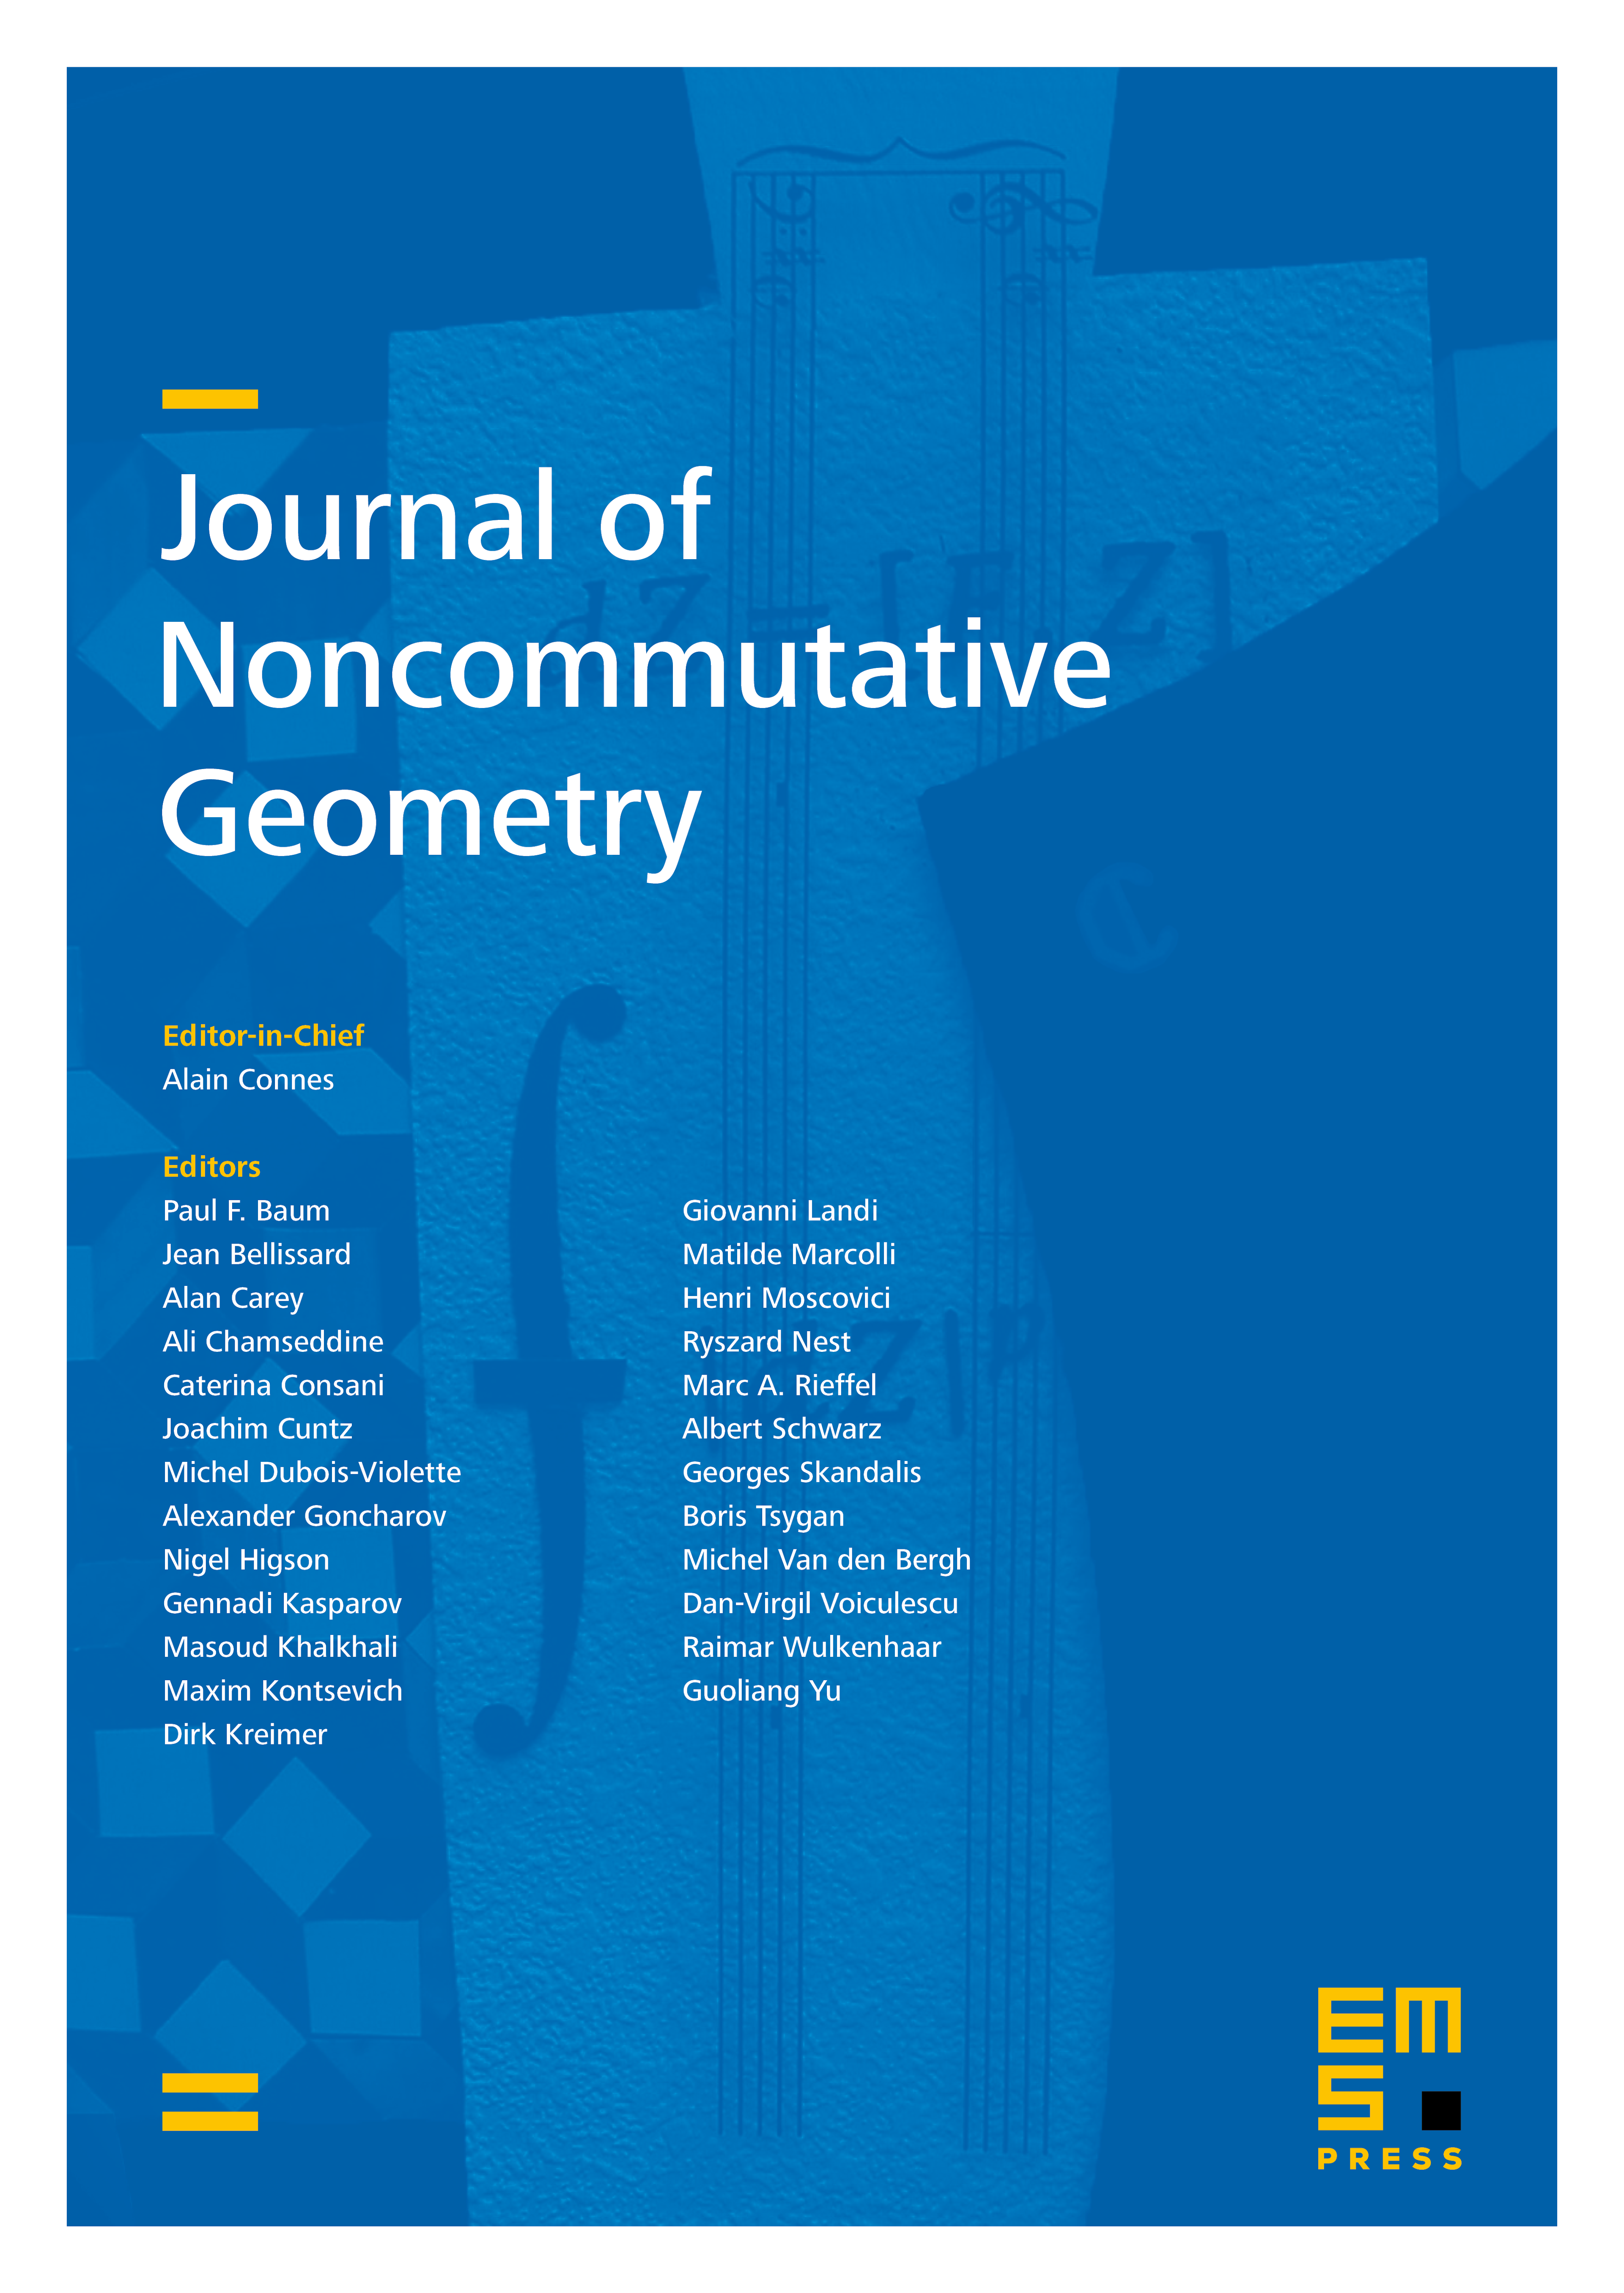 Quasifolds, diffeology and noncommutative geometry cover